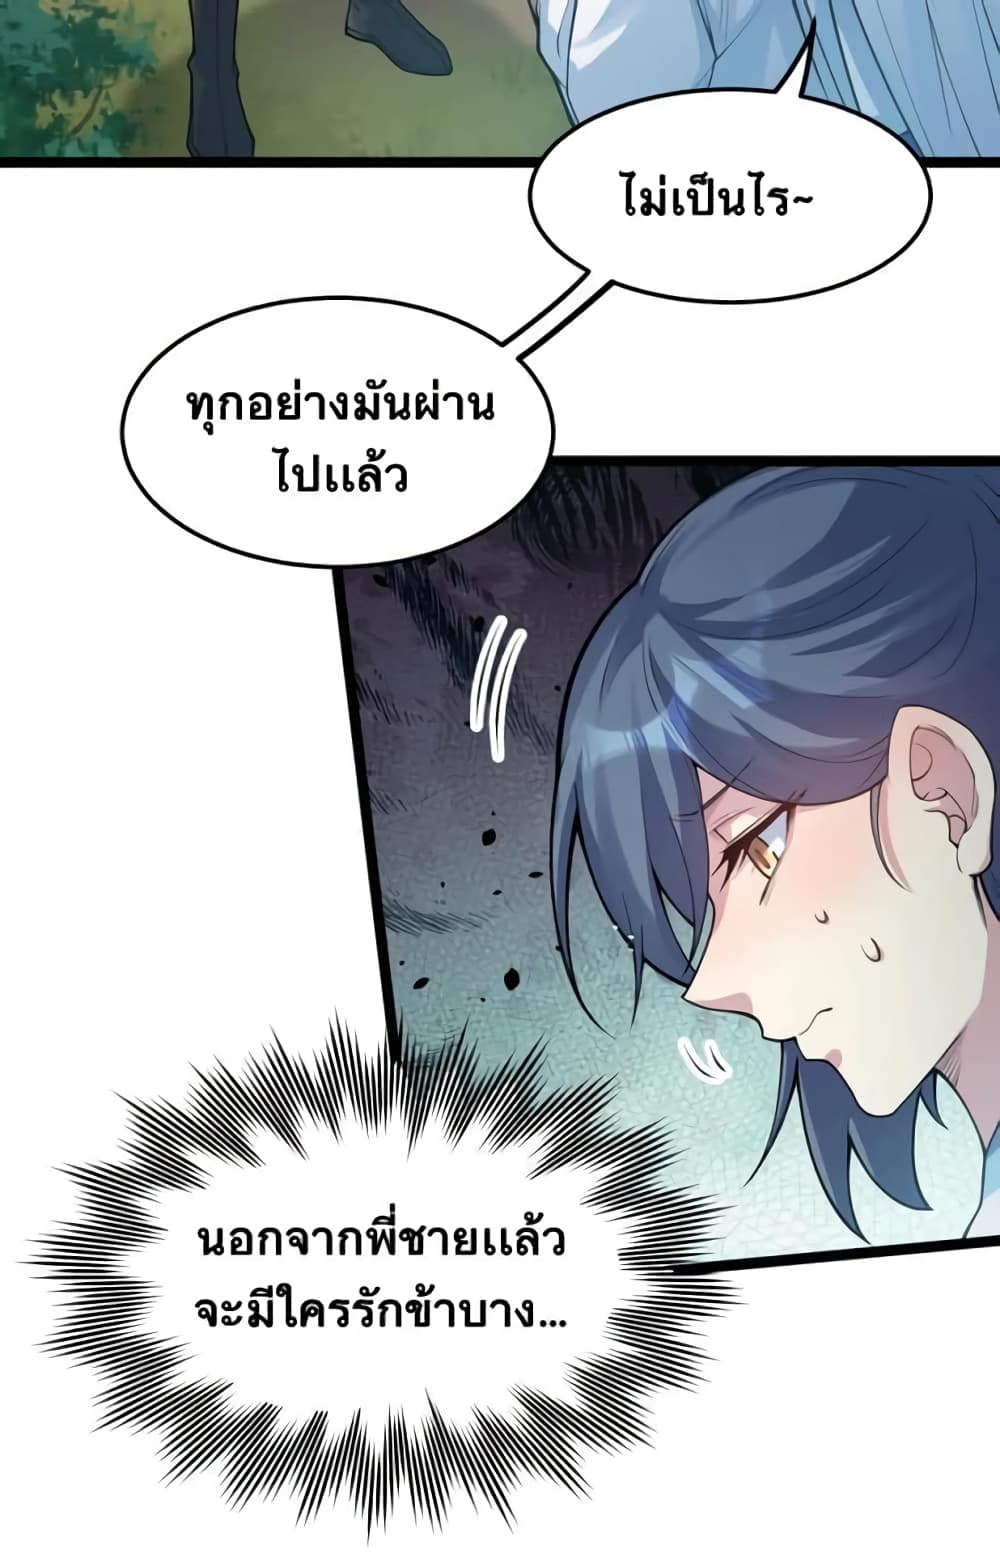 Godsian Masian from Another World ตอนที่ 92 (22)